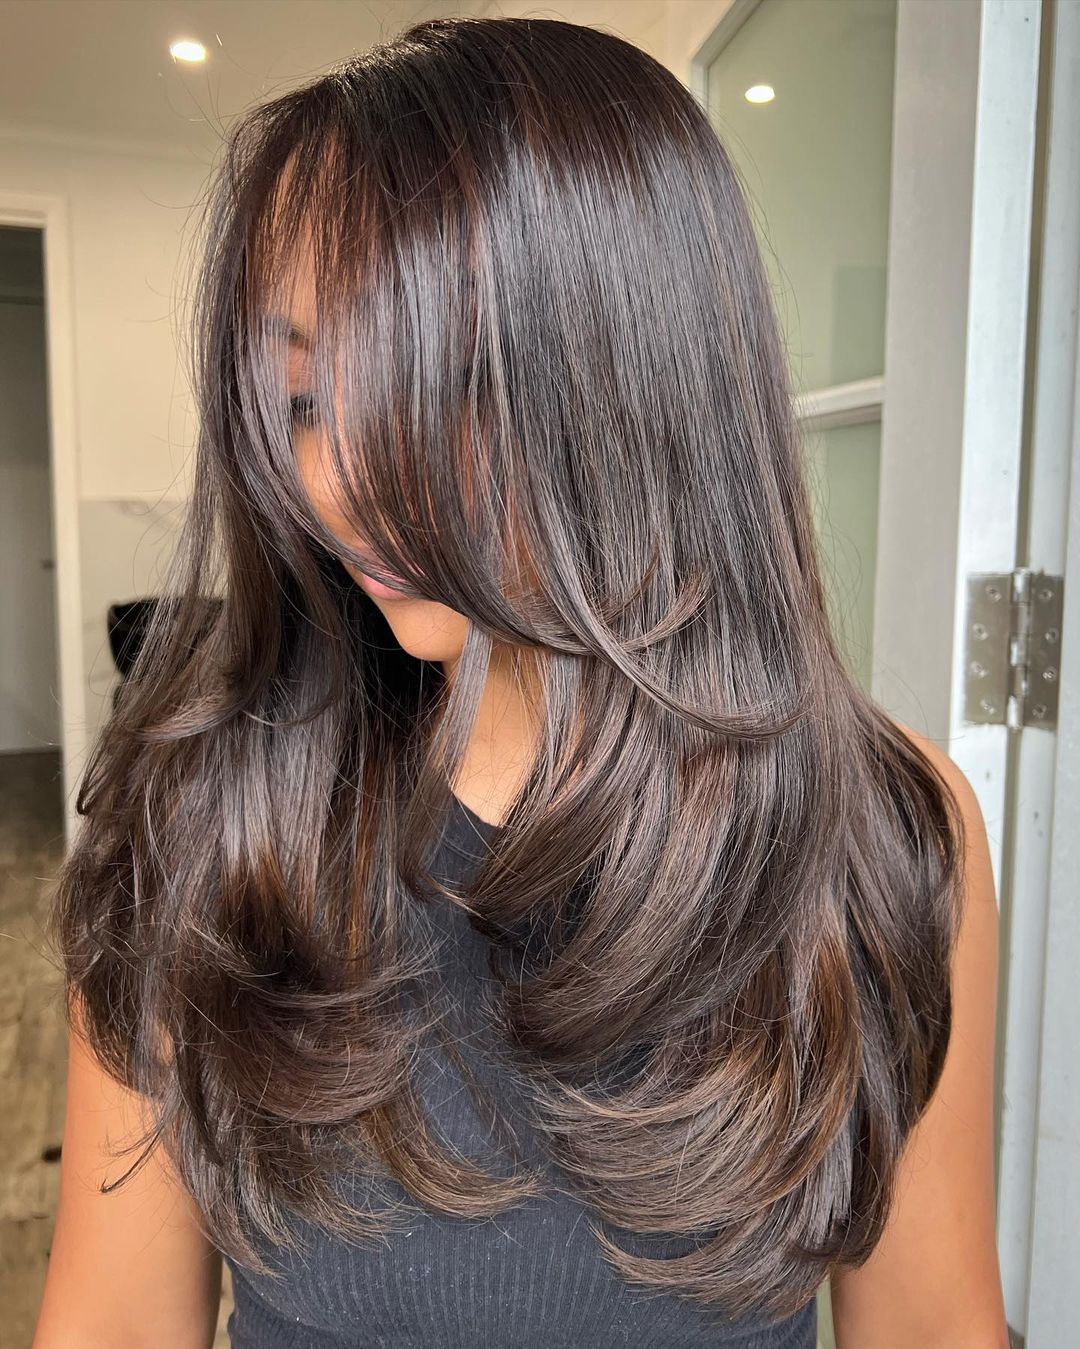 Luscious Brown Hair with Soft Wave on Layers